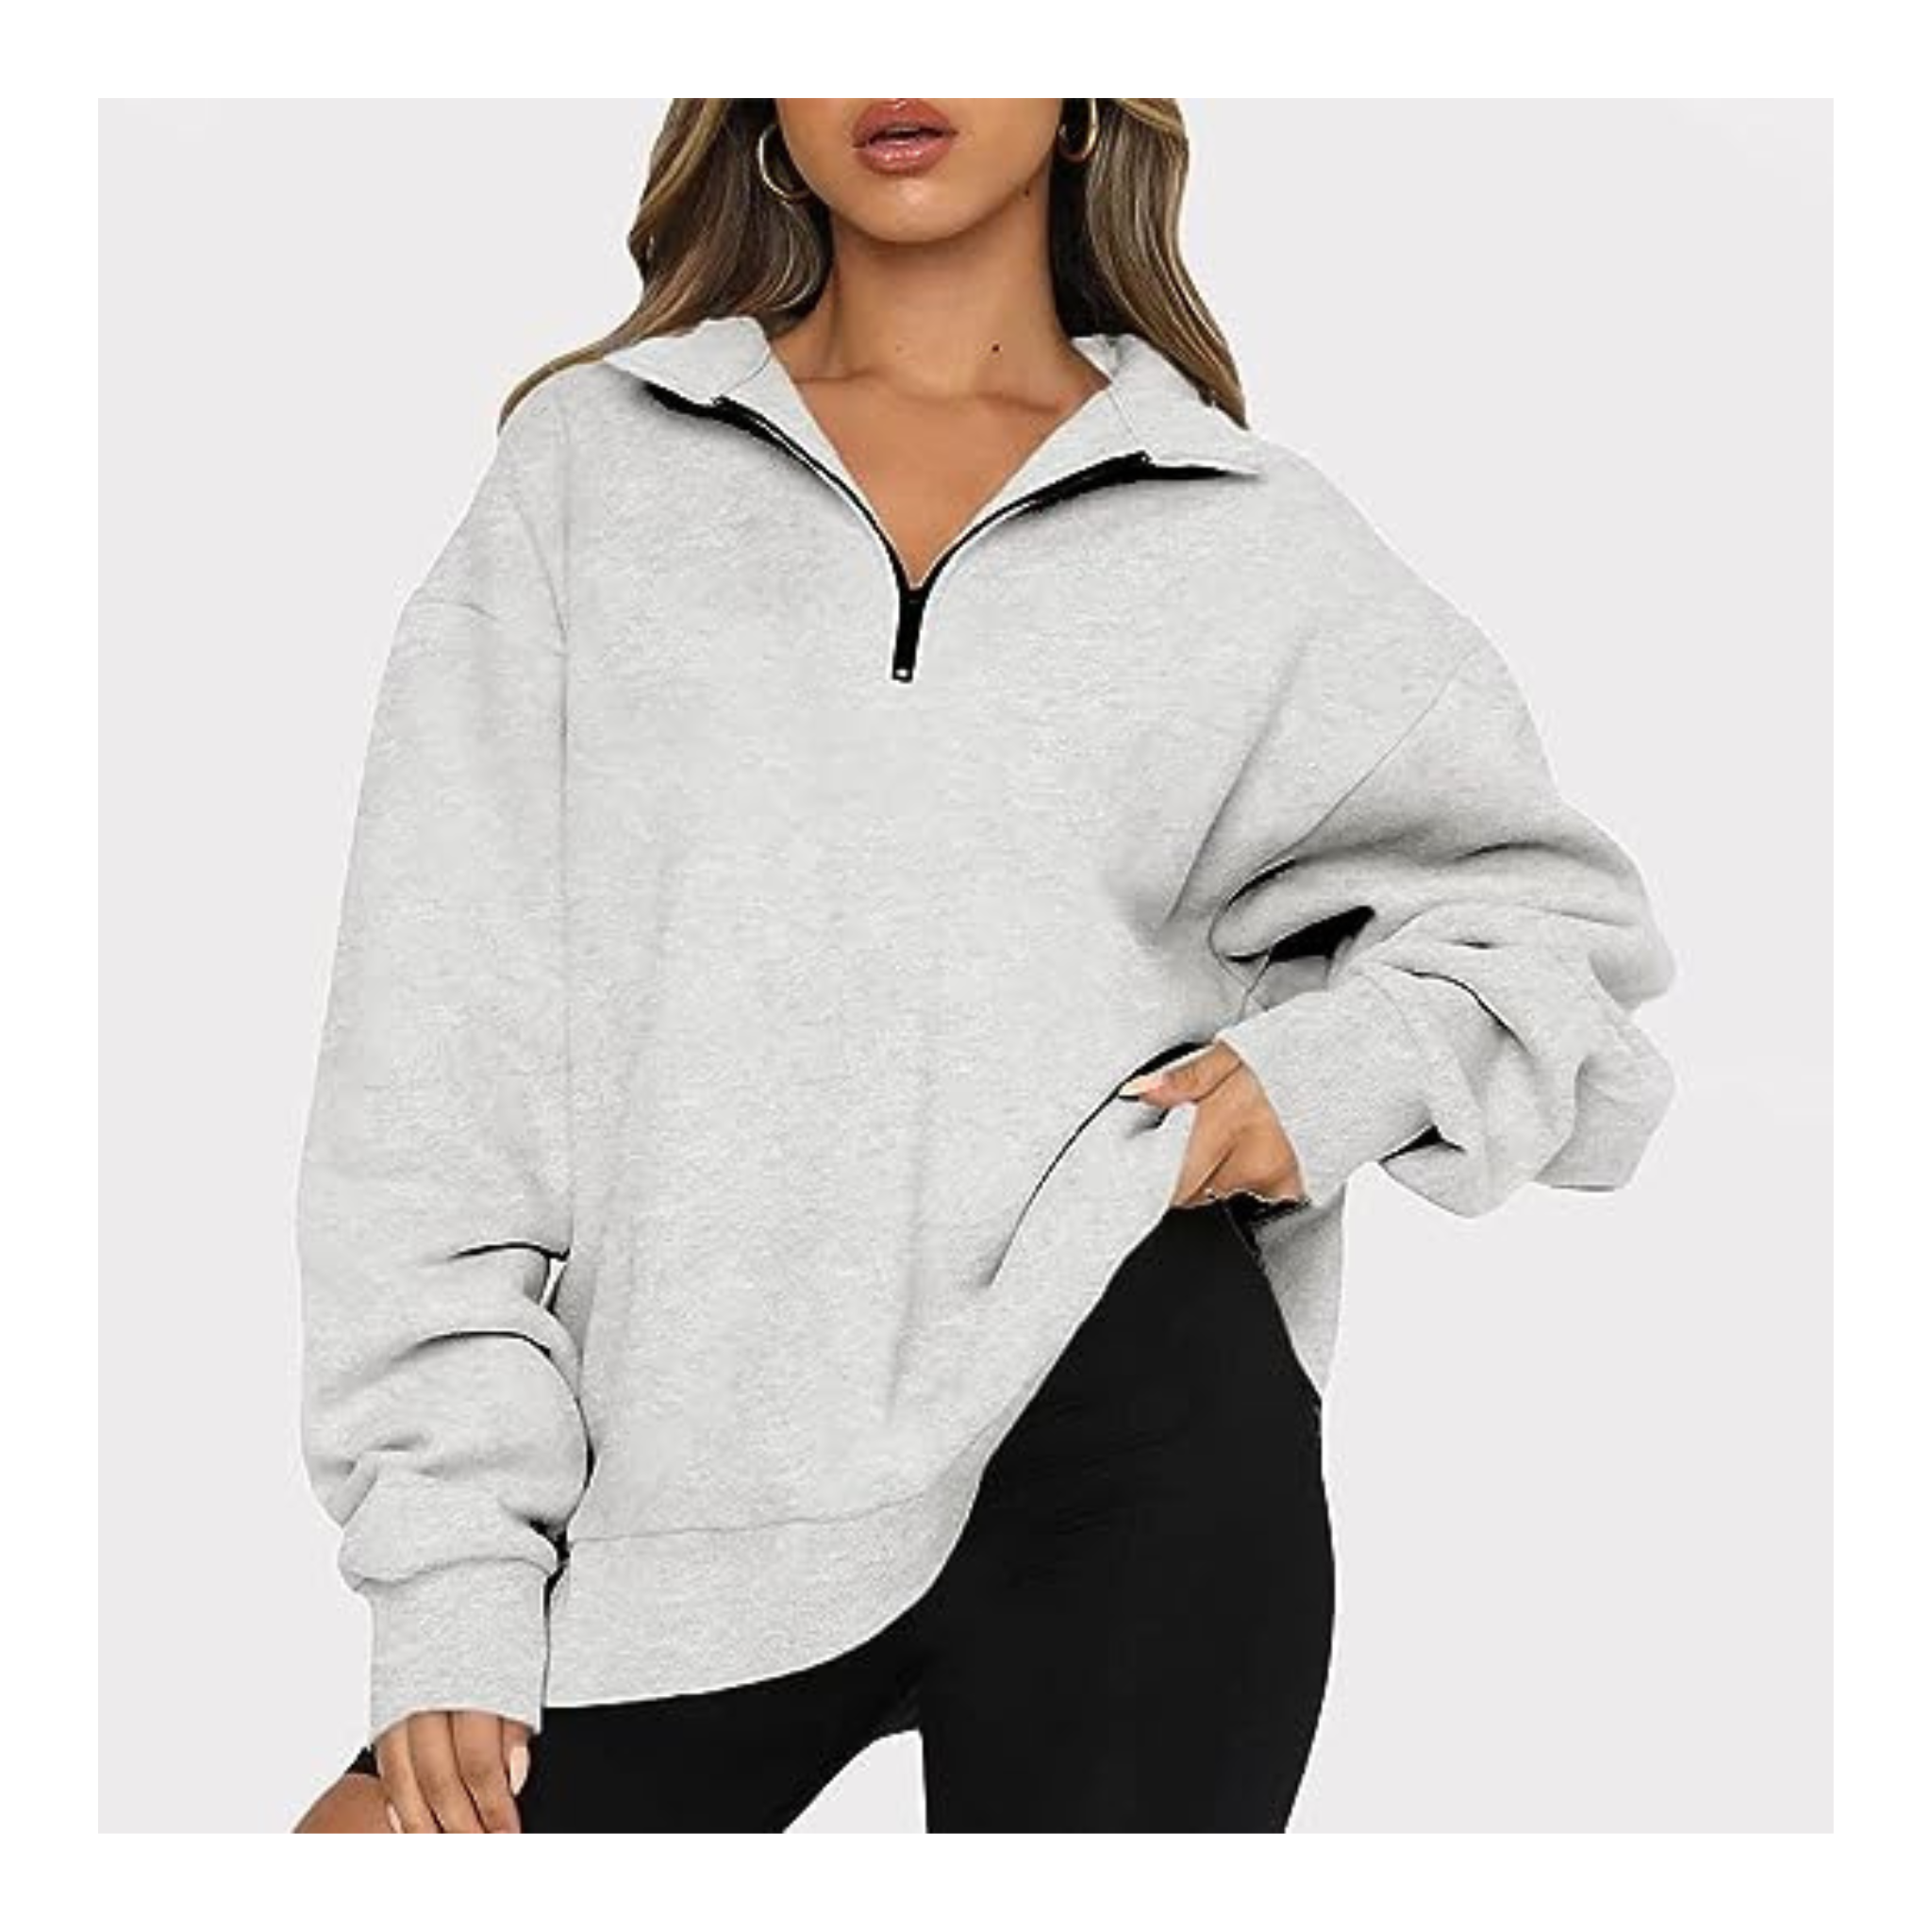 Women's Oversized Casual Half Zip Pullover Tops (MANY COLORS)